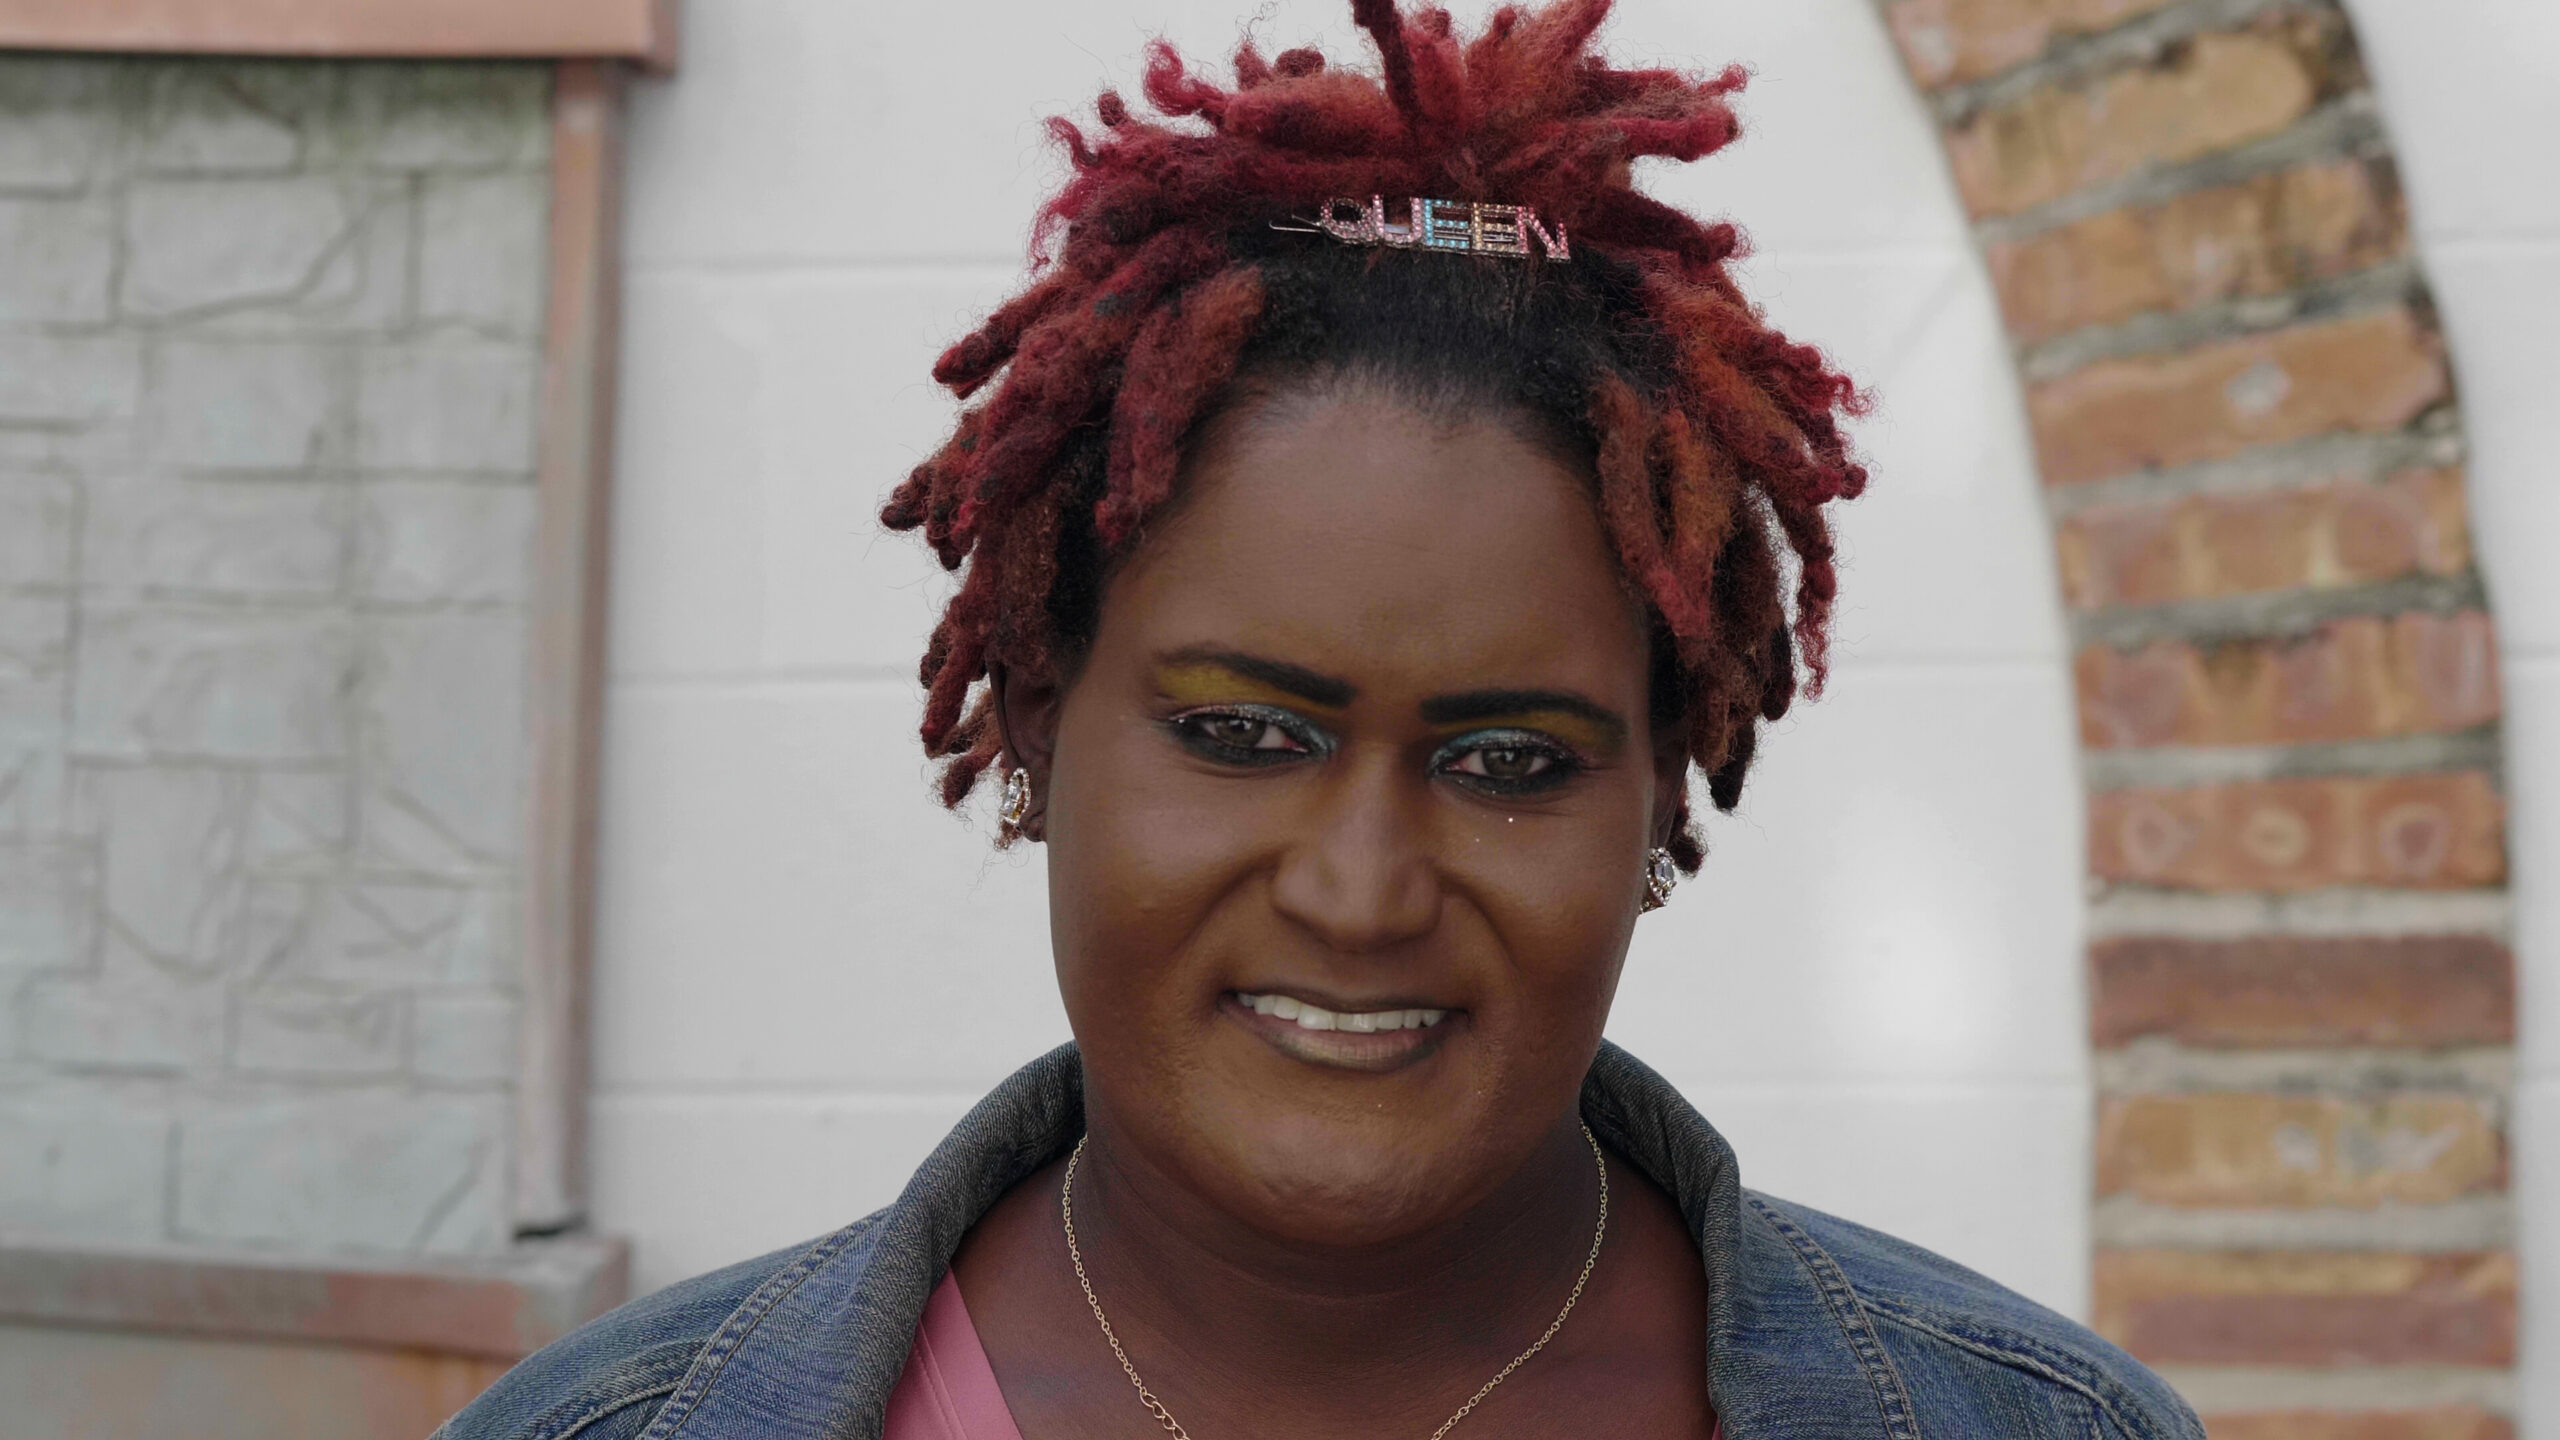 A woman with red dreadlocks on her head in front of a brick wall, advocating for trans rights in New Orleans.